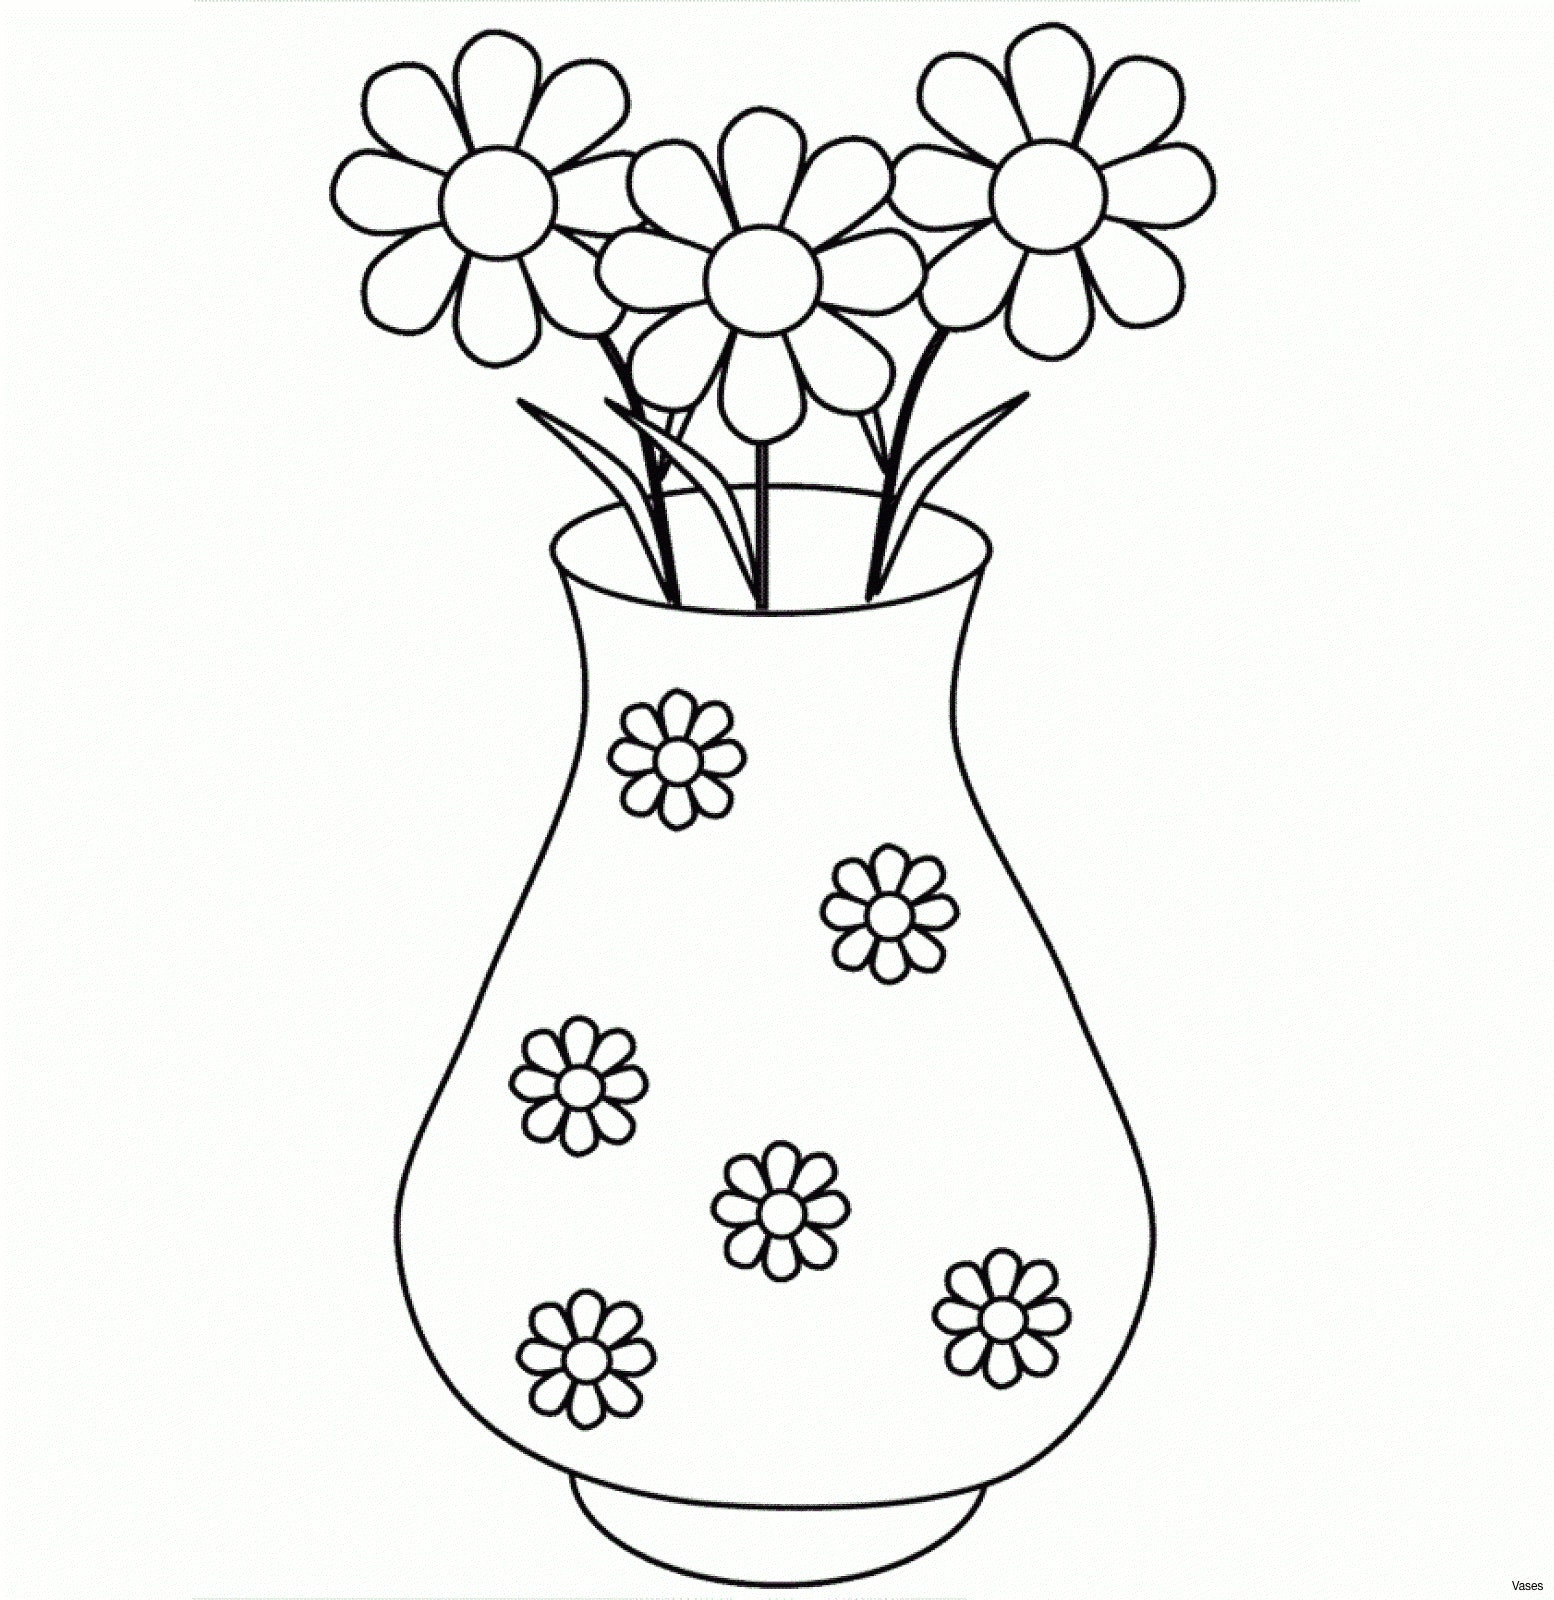 Drawing Of Rose In Vase Images Of Easy Drawings Vase Art Drawings How to Draw A Vase Step 2h